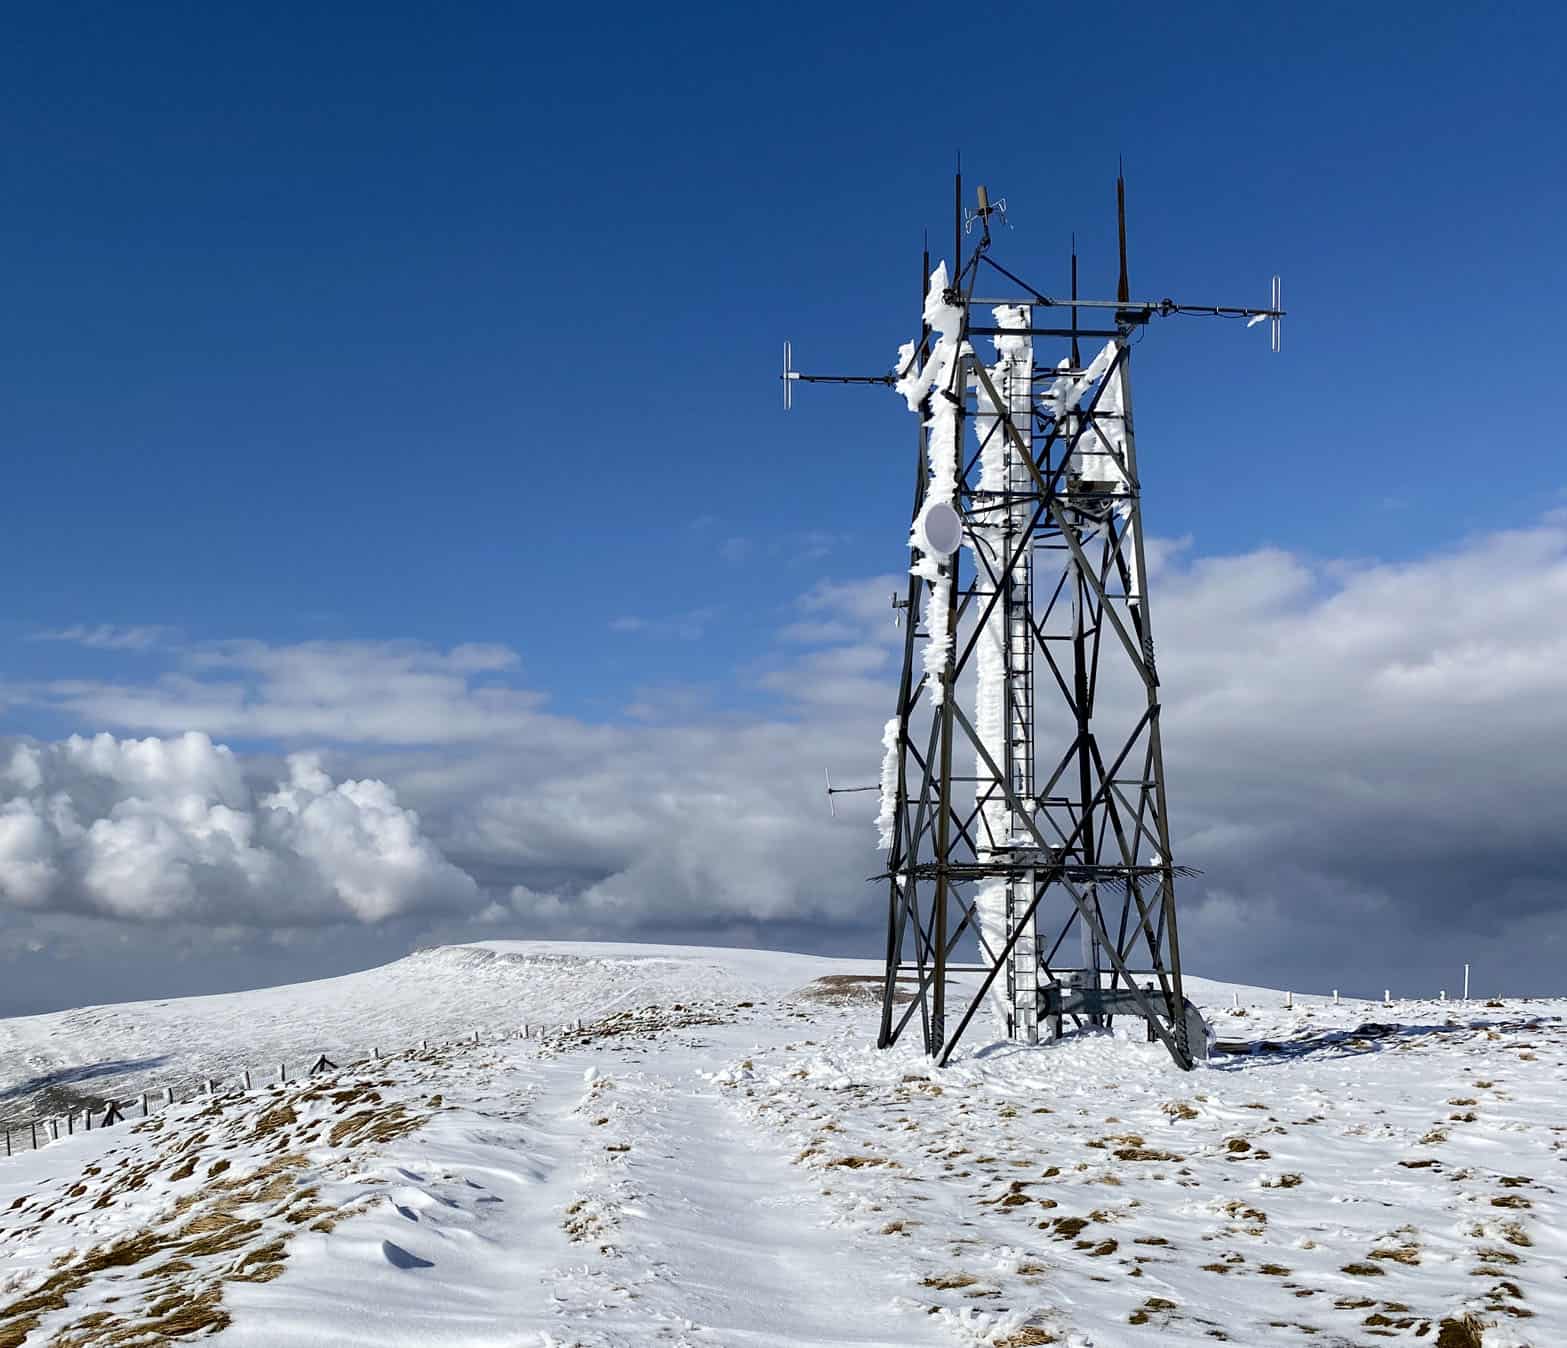 A few pictures of the radar station at the top of Great Dun Fell, height 848 metres (2782 feet). Great Dun Fell is about one-third of the way round this Cross Fell walk.